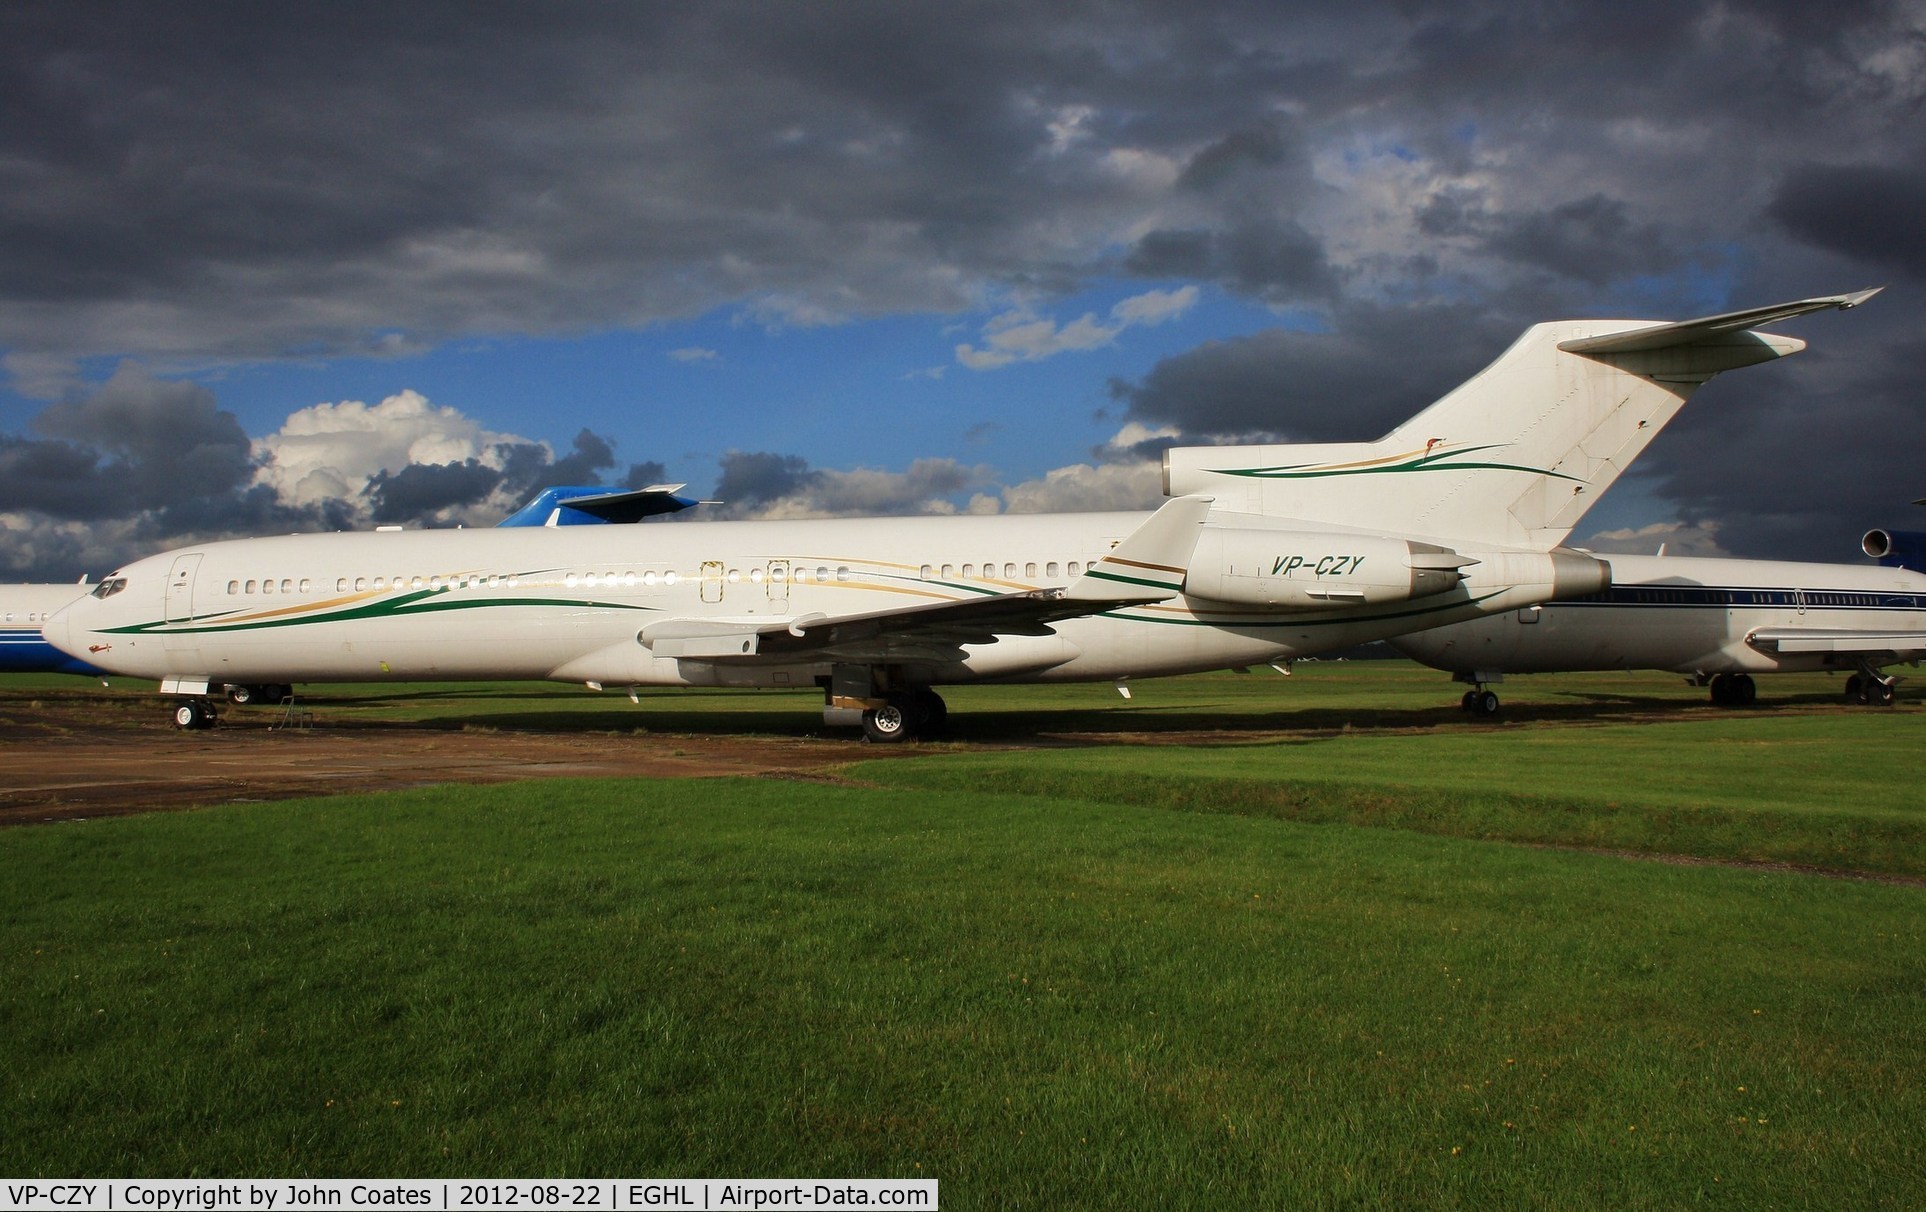 VP-CZY, 1978 Boeing 727-2P1 C/N 21595, After the storm at ATC